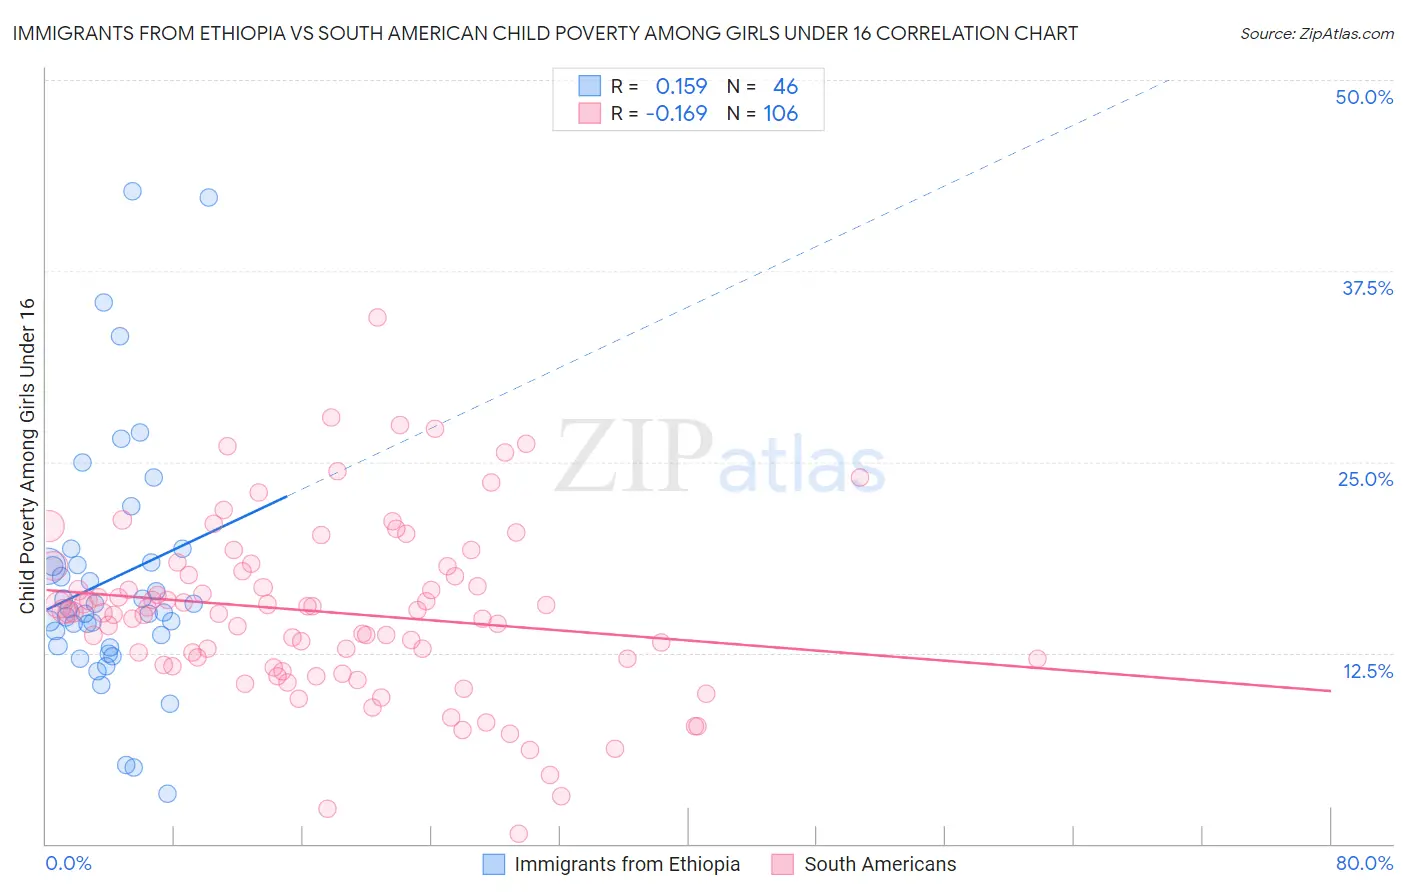 Immigrants from Ethiopia vs South American Child Poverty Among Girls Under 16